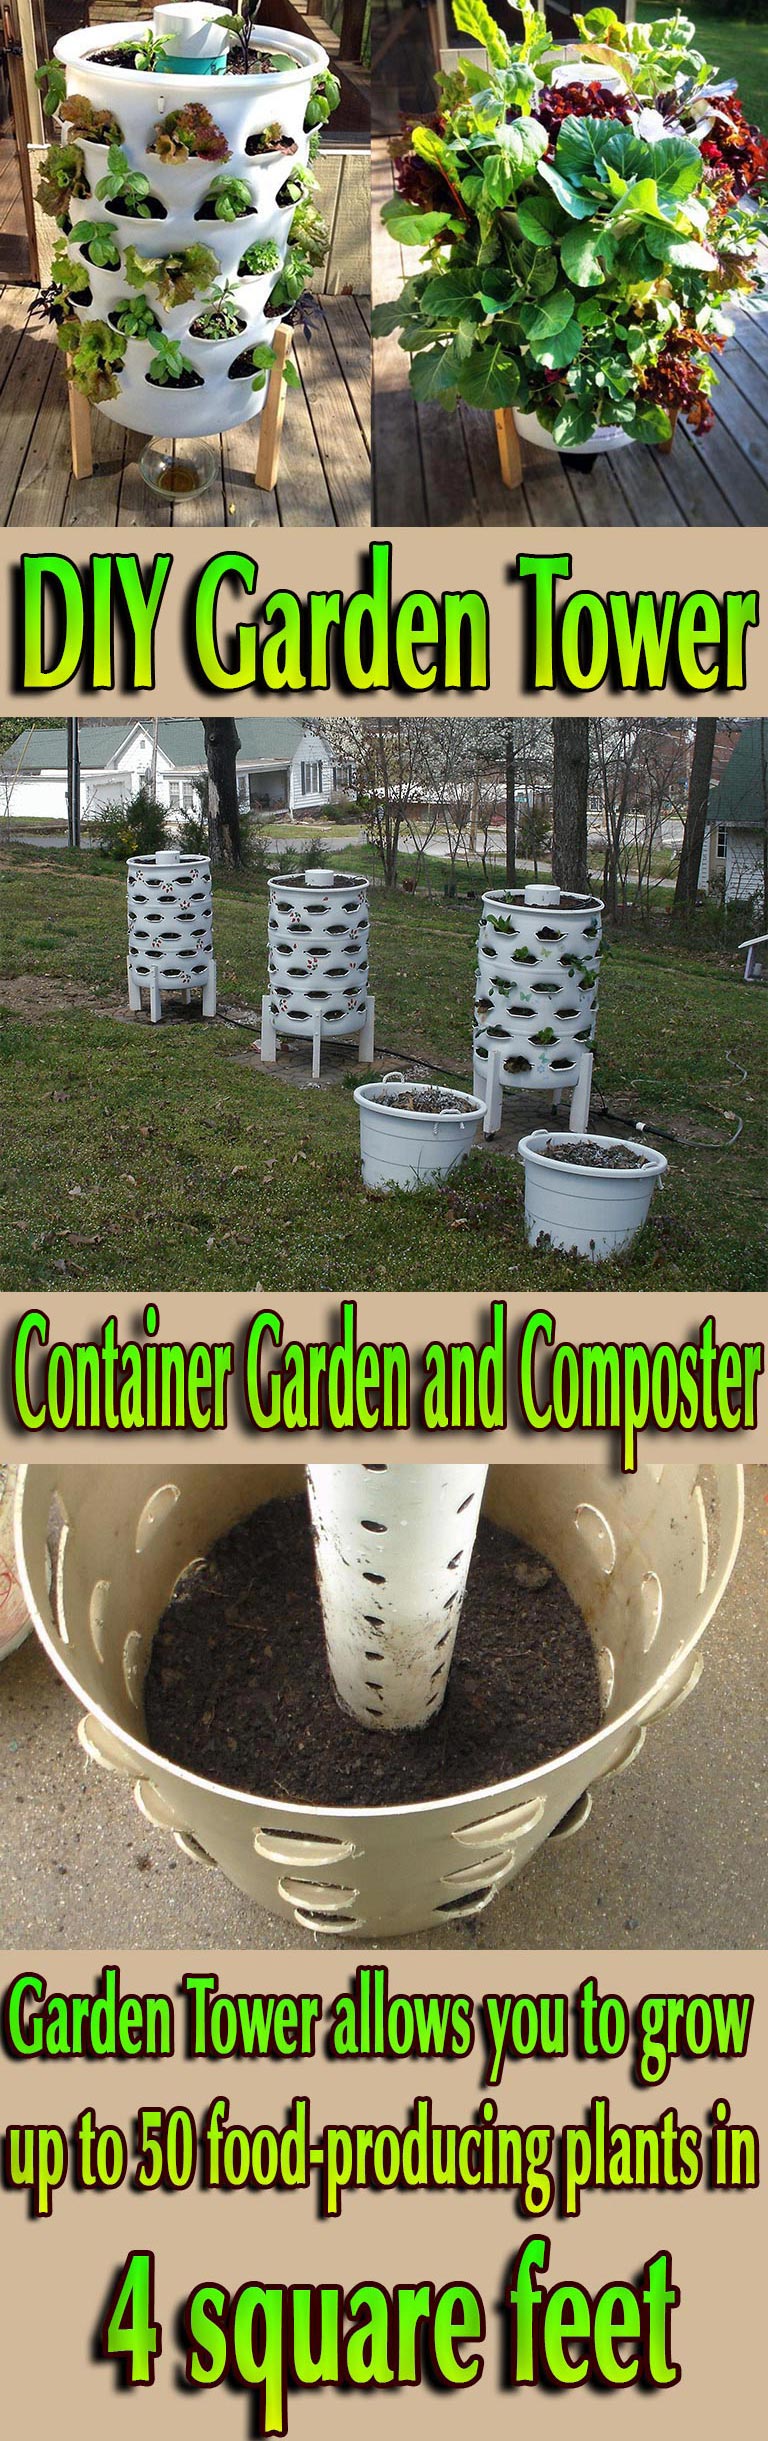 Container Garden and Composter